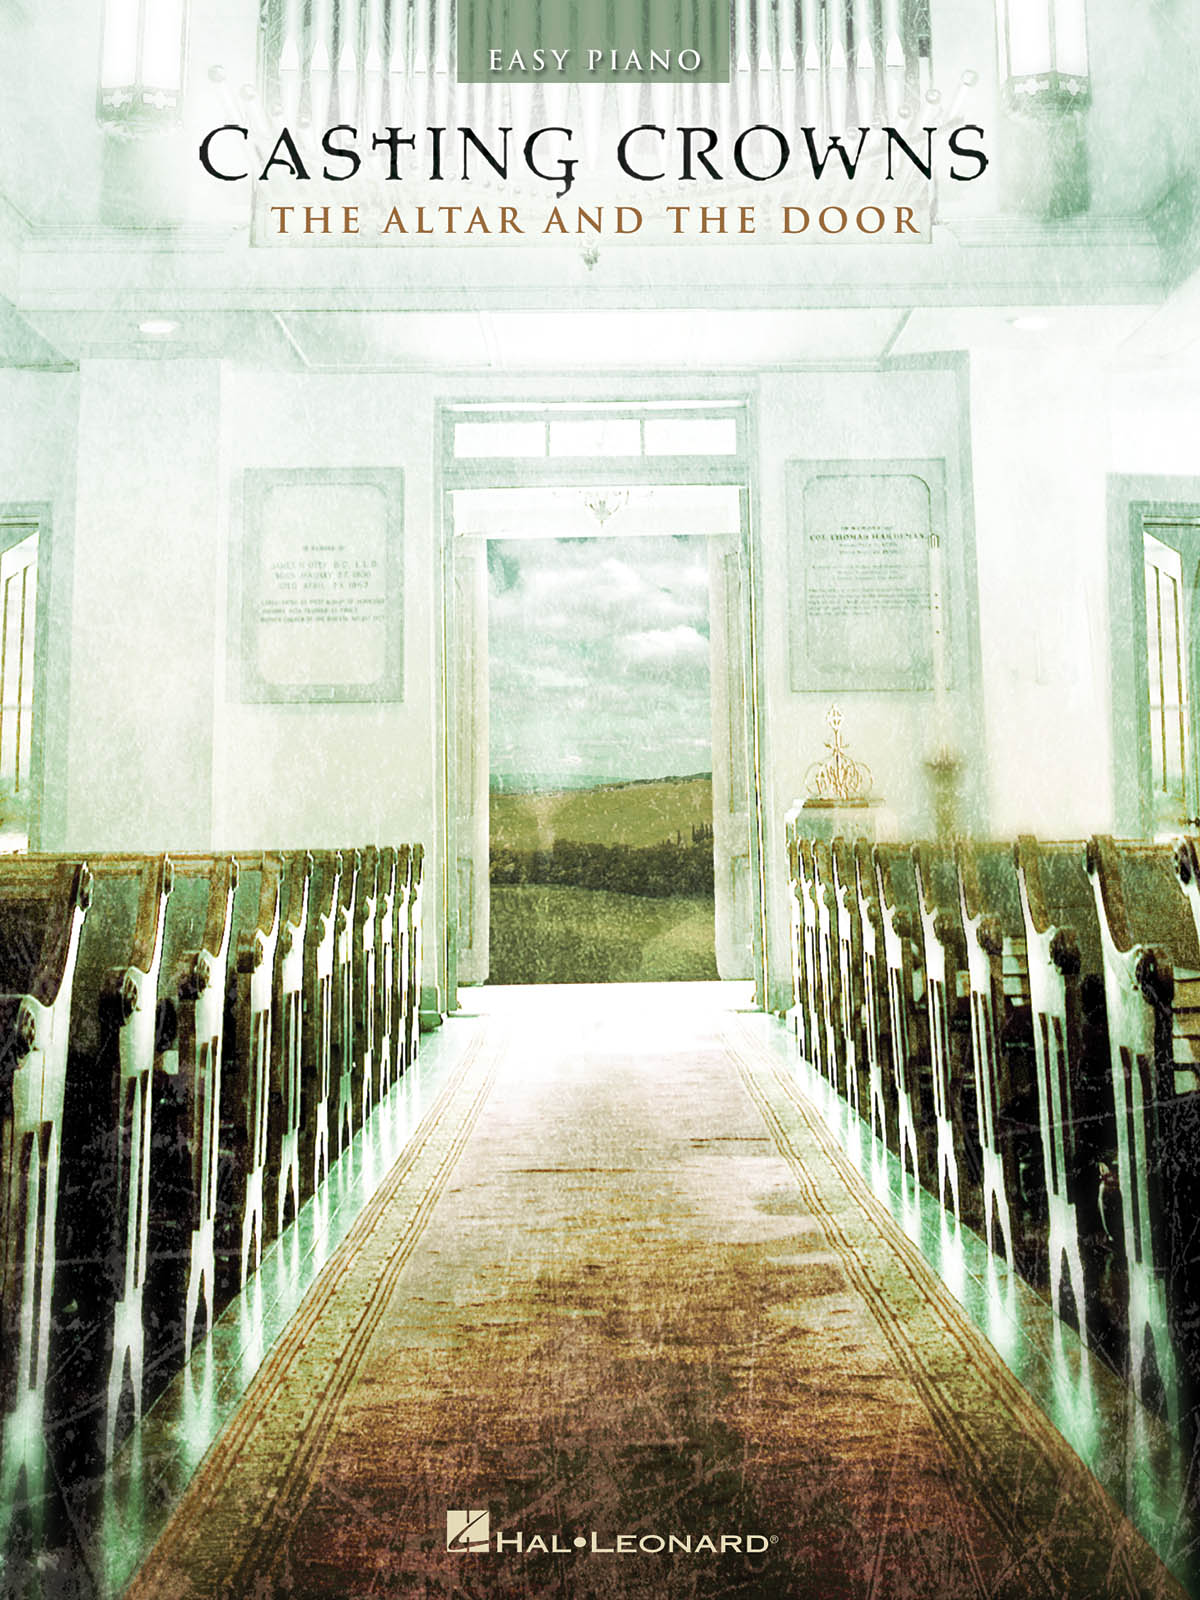 Casting Crowns – The Altar and the Door